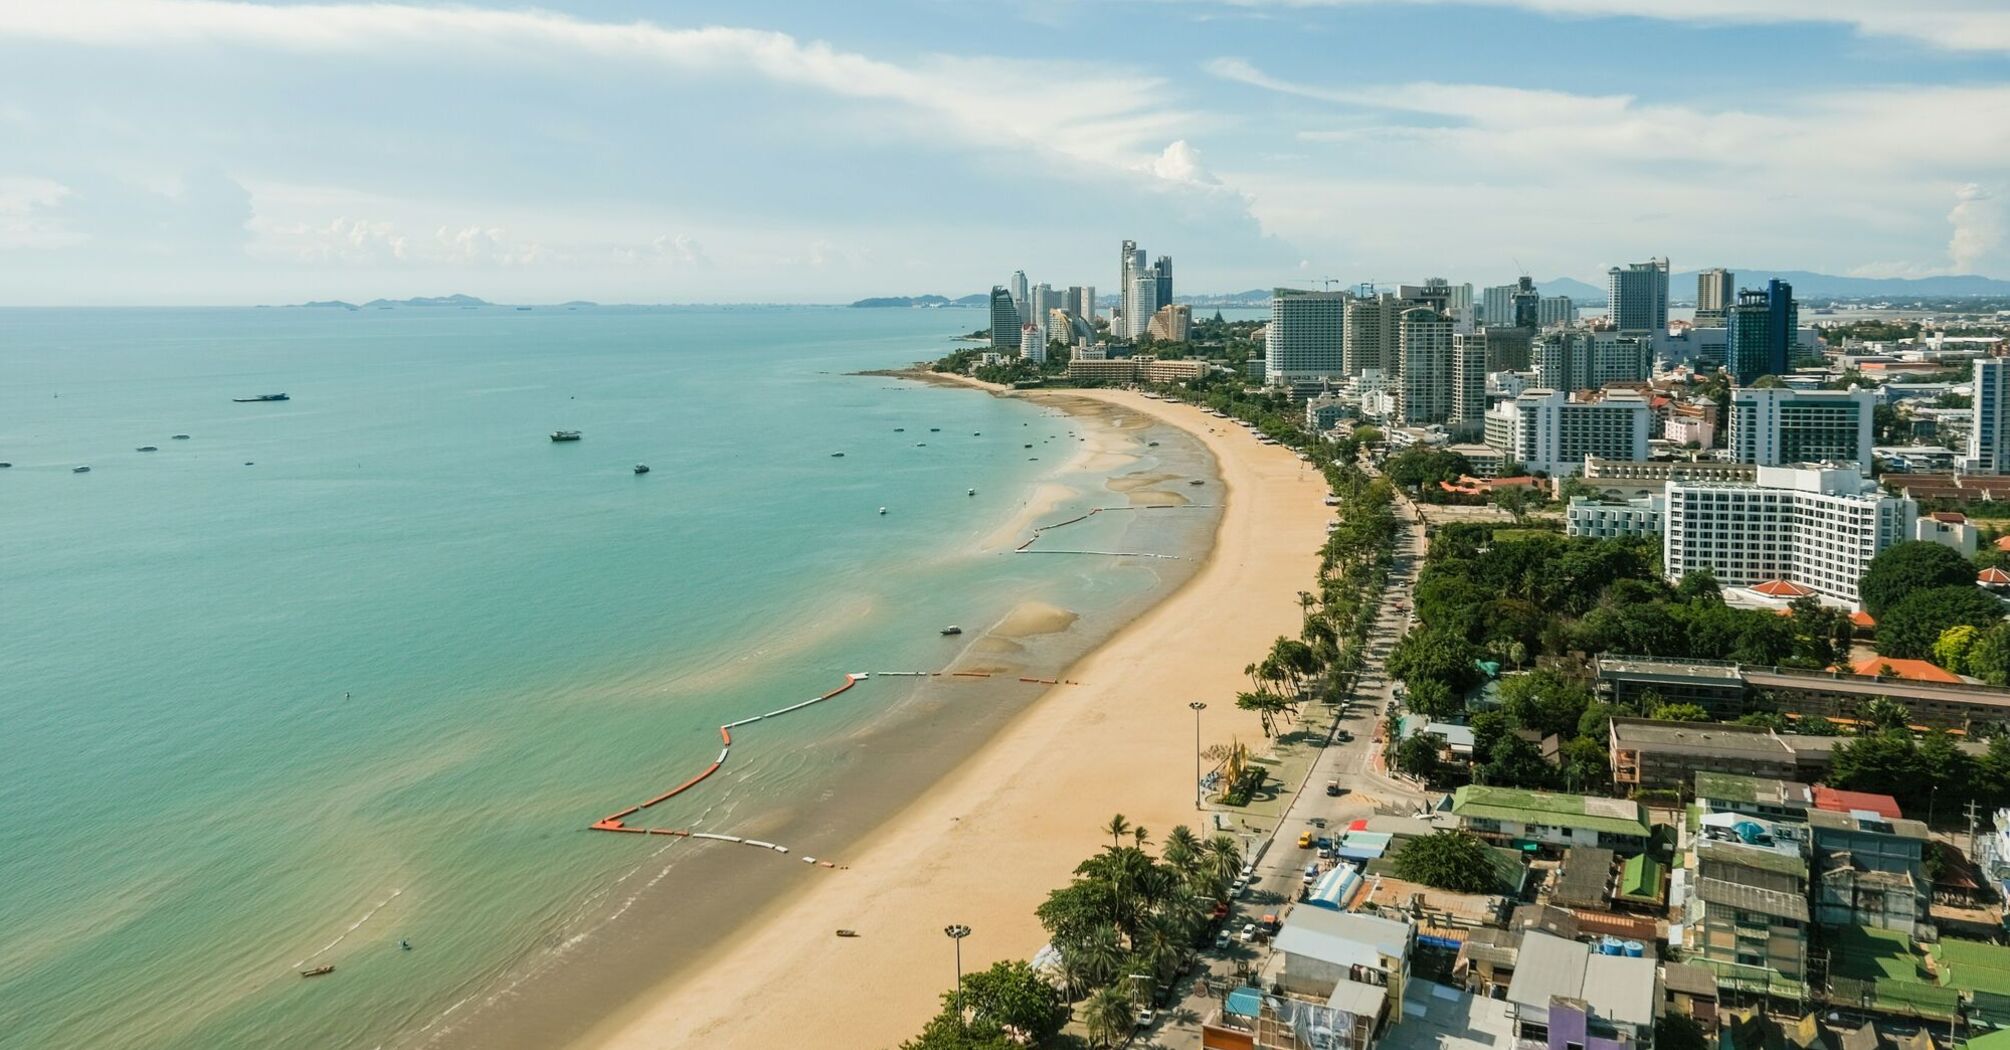 A panoramic view of Pattaya, Thailand, showcasing the expansive sandy beach along the coast with boats in the water